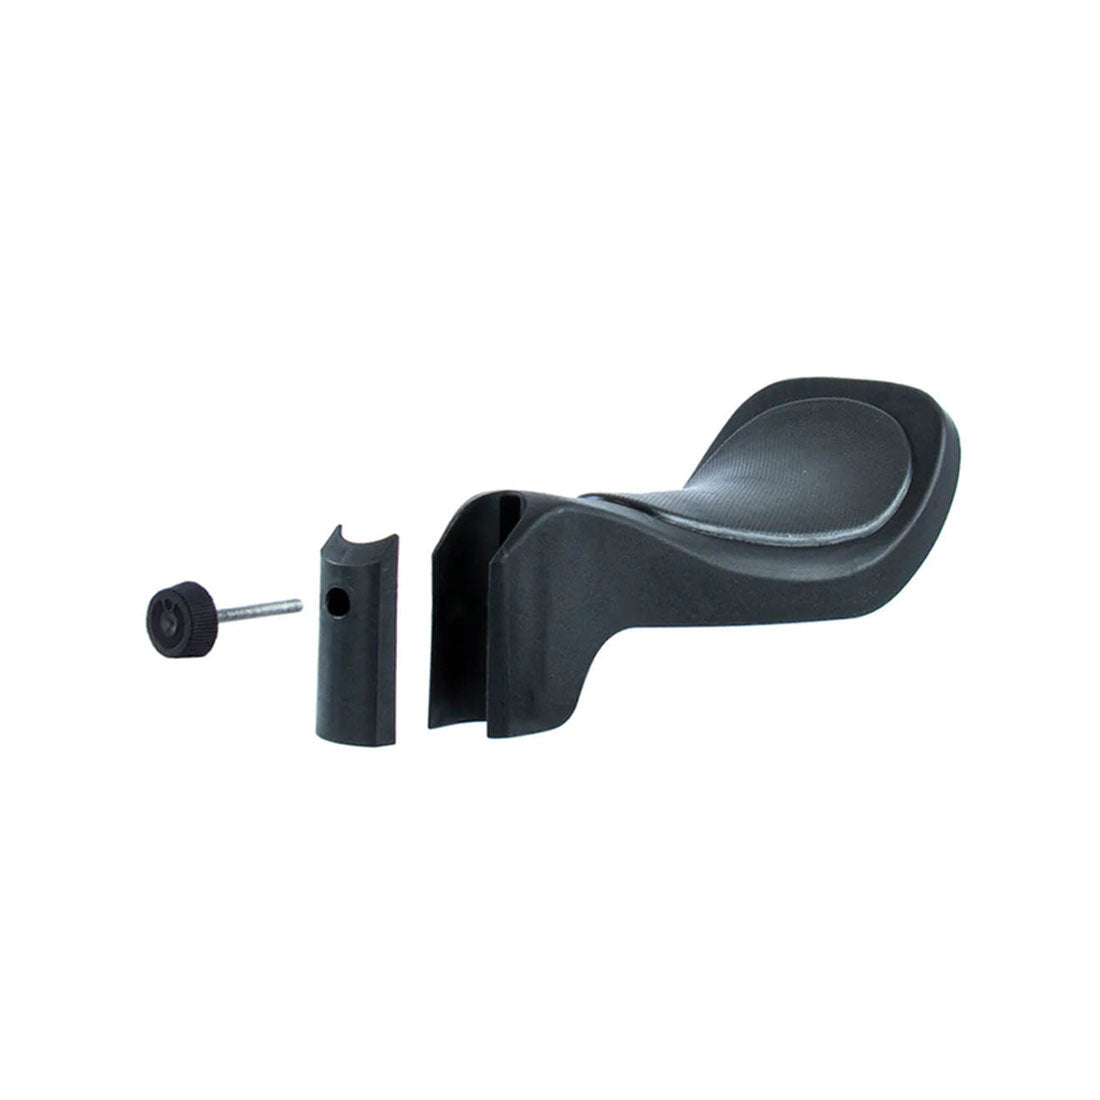 I-Glide Scooter Seat - Black Scooter Accessories